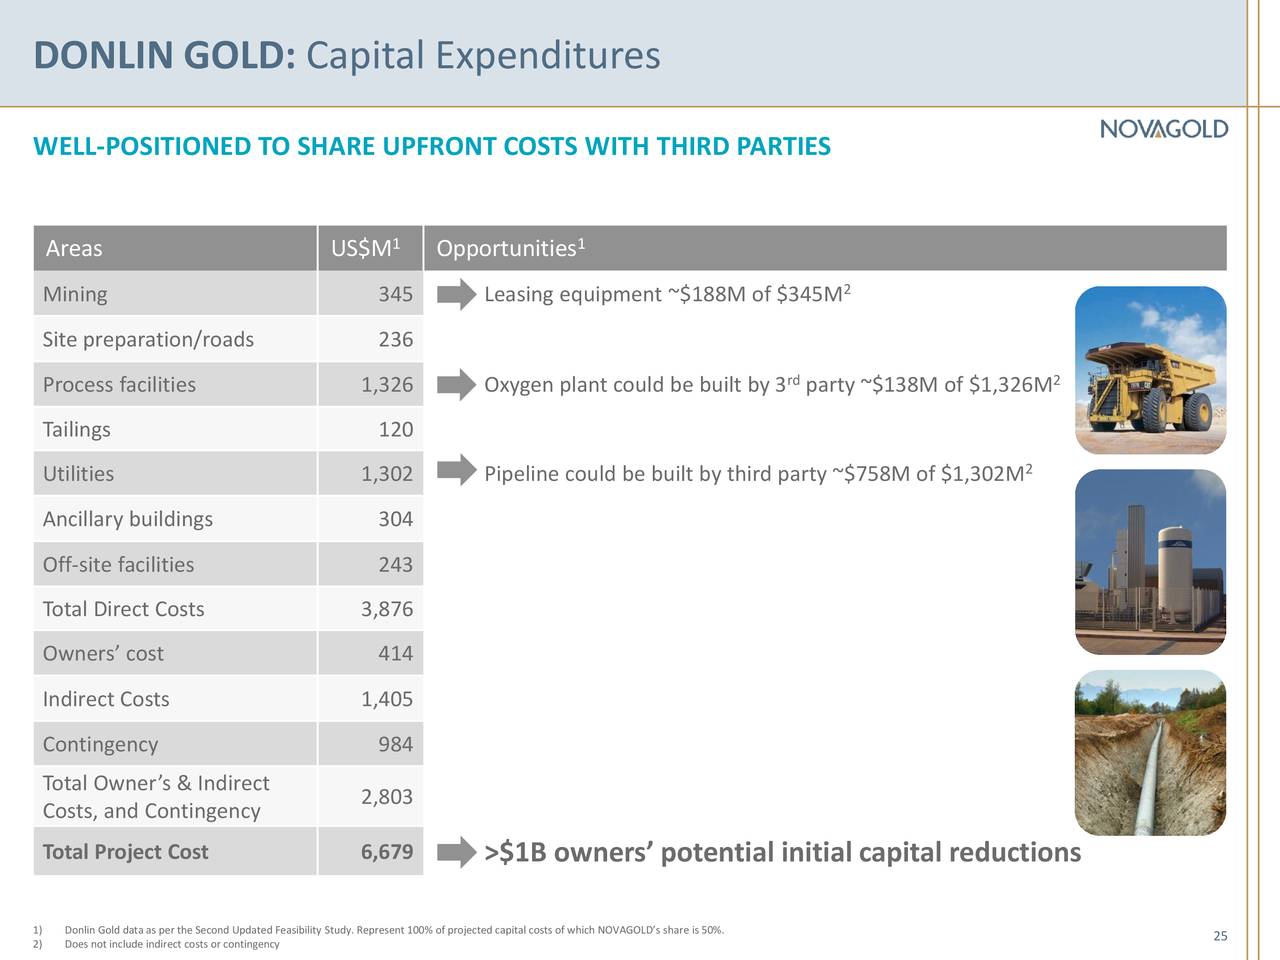 DONLIN GOLD: Capital Expenditures